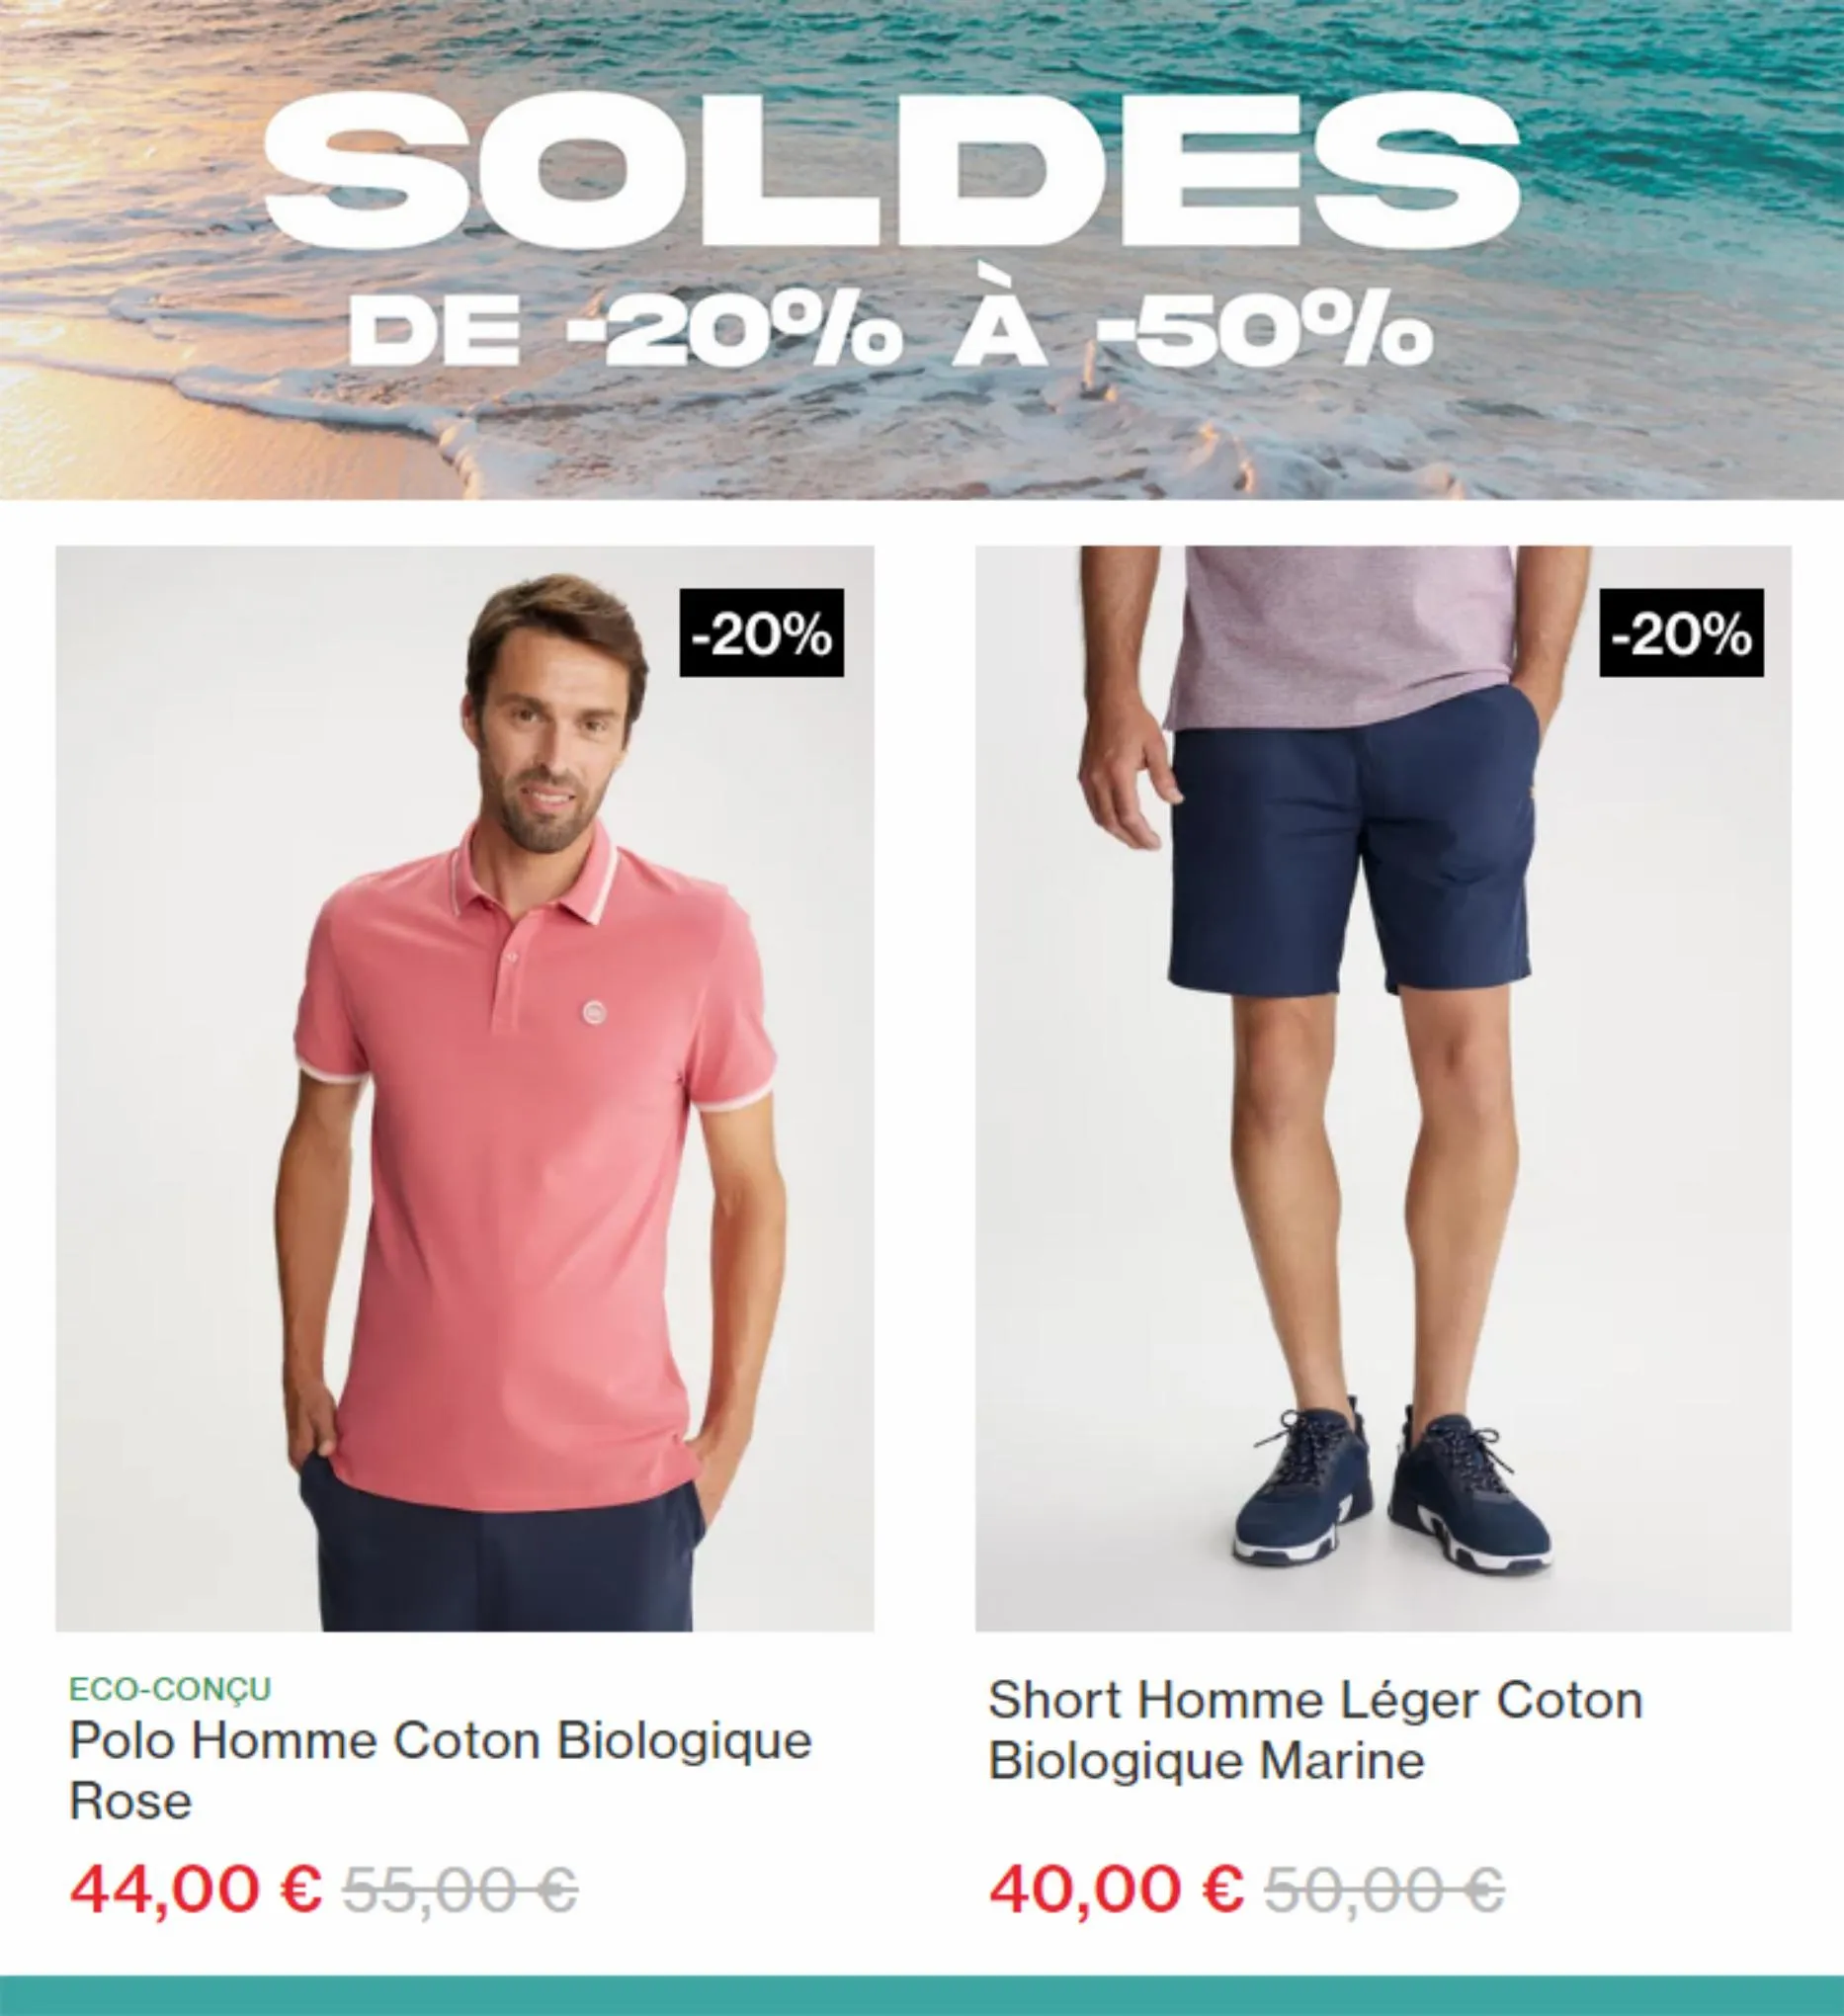 Catalogue SOLDES -20% -50%!, page 00005